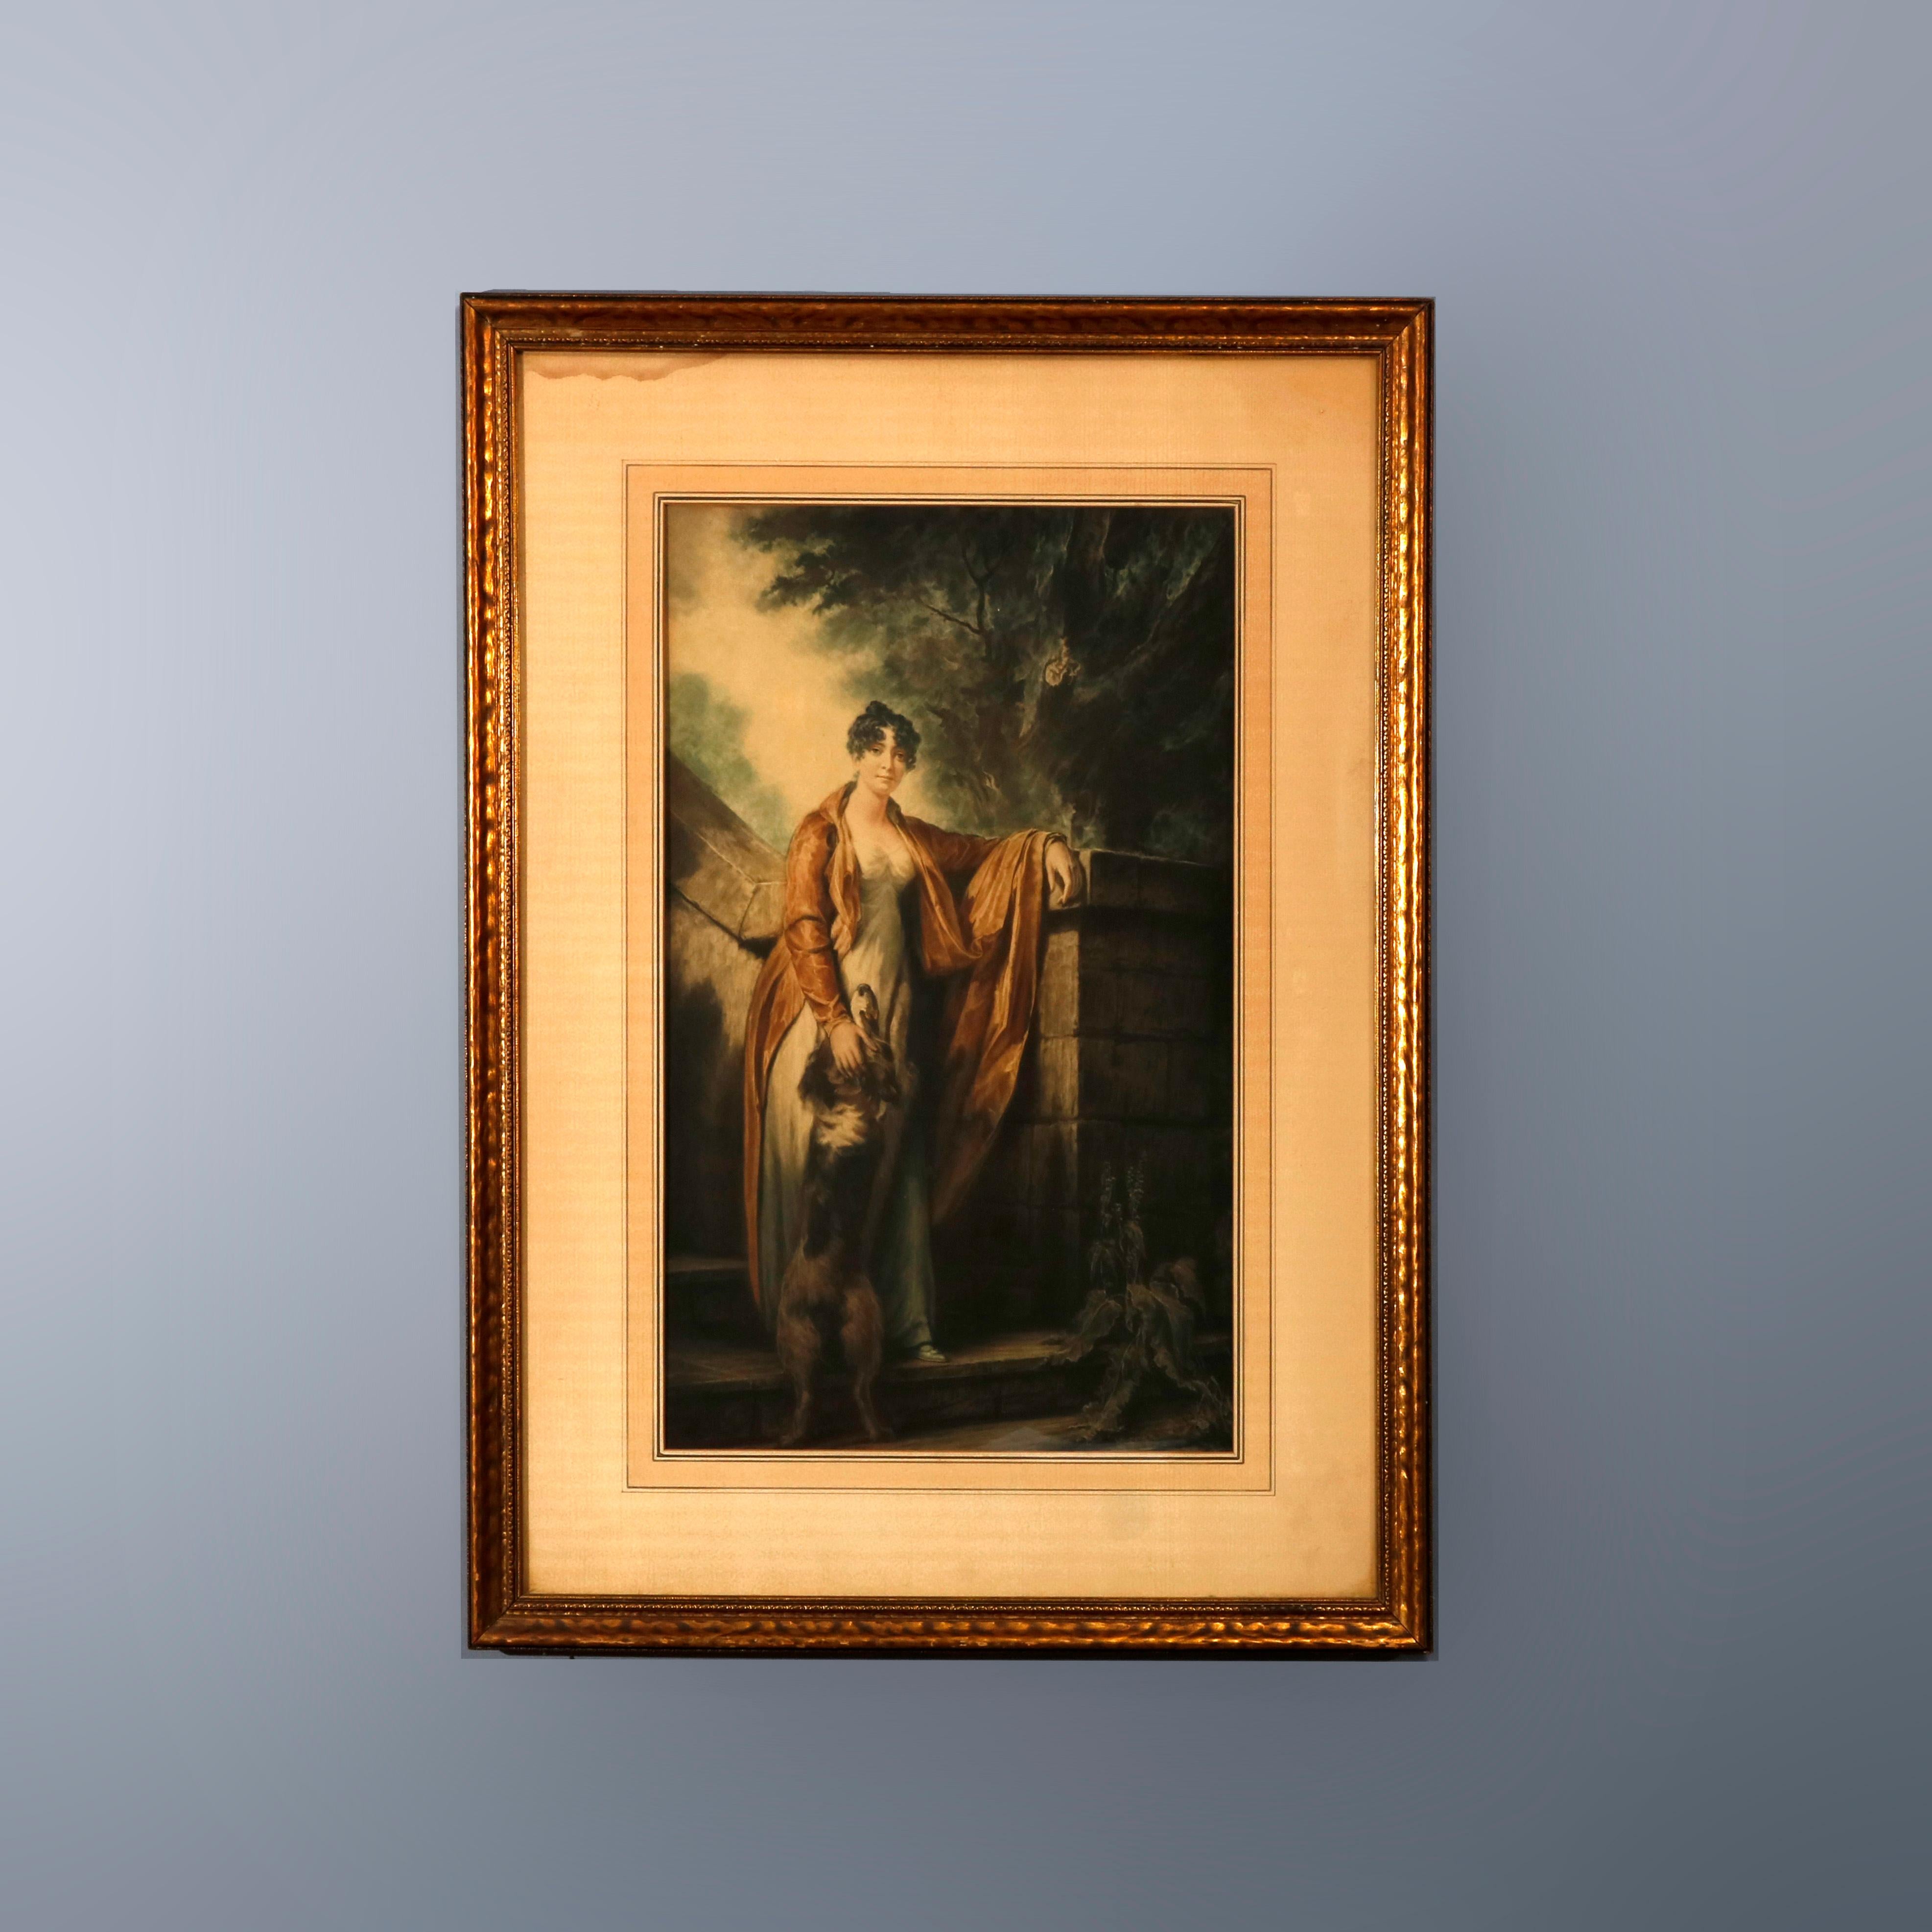 A vintage Victorian style genre print depicts a portrait of a woman and her dog in countryside setting, framed and matted, 20th C

Measure- 35.63